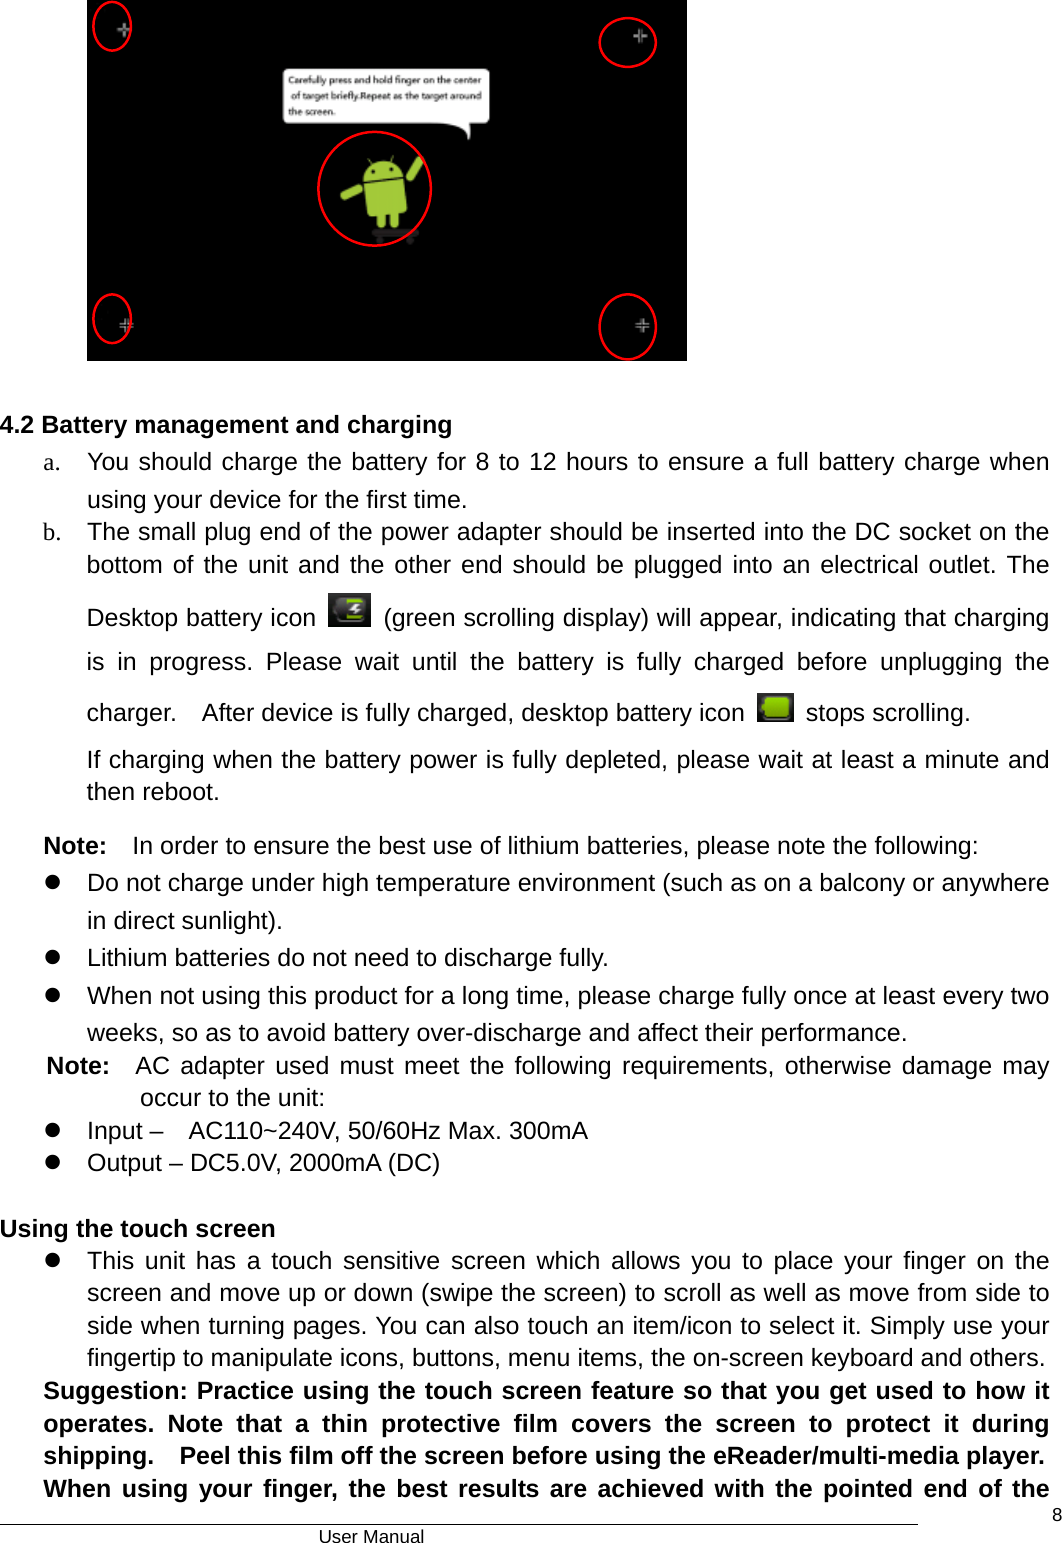                                      User Manual    8          4.2 Battery management and charging a.  You should charge the battery for 8 to 12 hours to ensure a full battery charge when using your device for the first time.   b.  The small plug end of the power adapter should be inserted into the DC socket on the bottom of the unit and the other end should be plugged into an electrical outlet. The Desktop battery icon    (green scrolling display) will appear, indicating that charging is in progress. Please wait until the battery is fully charged before unplugging the charger.    After device is fully charged, desktop battery icon   stops scrolling.  If charging when the battery power is fully depleted, please wait at least a minute and then reboot. Note:    In order to ensure the best use of lithium batteries, please note the following:   z  Do not charge under high temperature environment (such as on a balcony or anywhere in direct sunlight).   z  Lithium batteries do not need to discharge fully.   z  When not using this product for a long time, please charge fully once at least every two weeks, so as to avoid battery over-discharge and affect their performance. Note:  AC adapter used must meet the following requirements, otherwise damage may    occur to the unit: z  Input –    AC110~240V, 50/60Hz Max. 300mA z  Output – DC5.0V, 2000mA (DC)  Using the touch screen z  This unit has a touch sensitive screen which allows you to place your finger on the screen and move up or down (swipe the screen) to scroll as well as move from side to side when turning pages. You can also touch an item/icon to select it. Simply use your fingertip to manipulate icons, buttons, menu items, the on-screen keyboard and others. Suggestion: Practice using the touch screen feature so that you get used to how it operates. Note that a thin protective film covers the screen to protect it during shipping.    Peel this film off the screen before using the eReader/multi-media player. When using your finger, the best results are achieved with the pointed end of the 